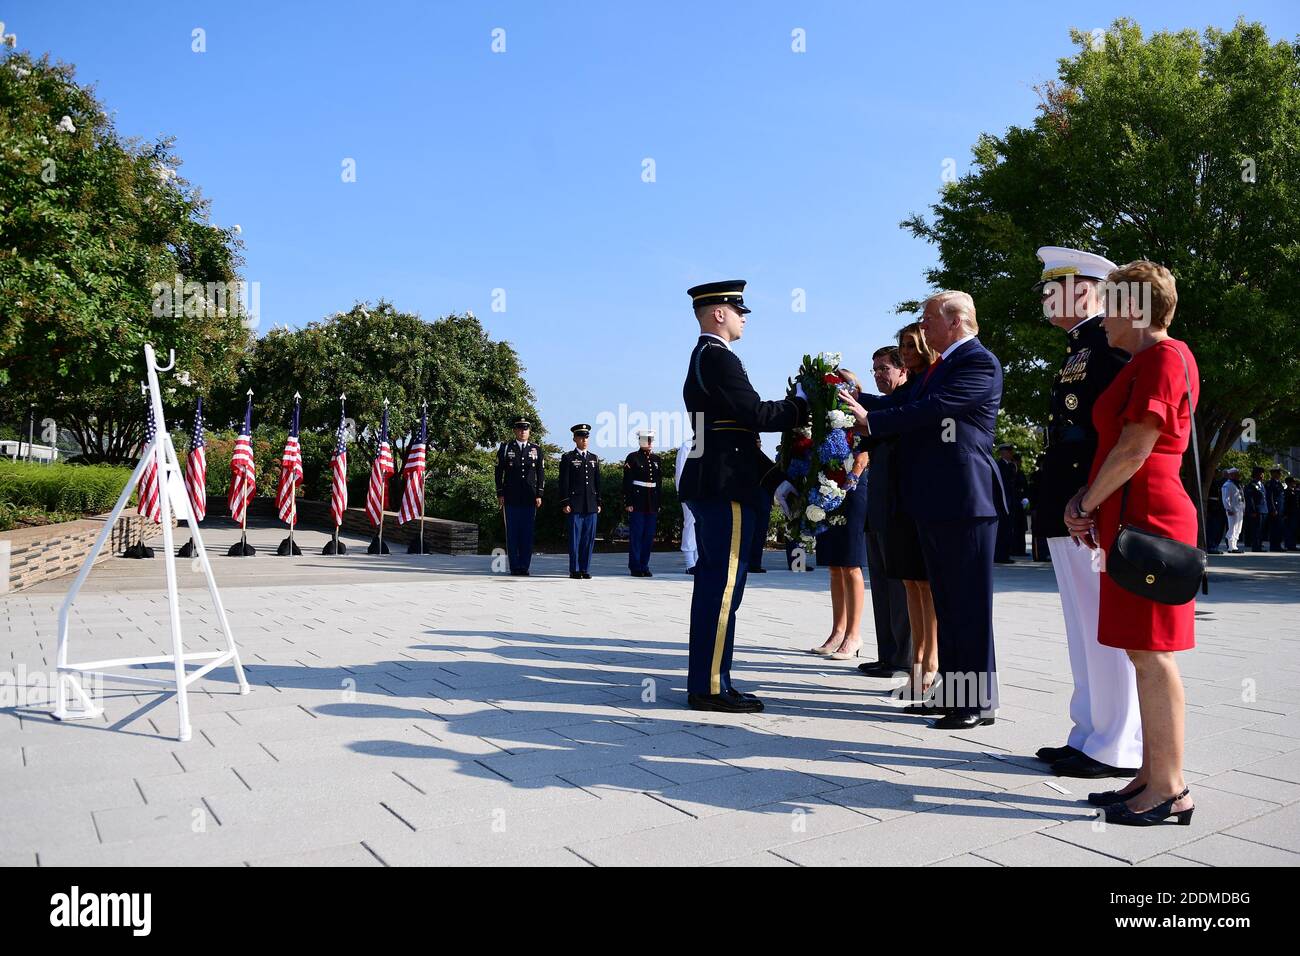 President Donald Trump lays a wreath at the Pentagon during the 18th anniversary commemoration of the September 11 terrorist attacks, in Arlington, Virginia on Wednesday, September 11, 2019. Photo by Kevin Dietsch/Pool/ABACAPRESS.COM Stock Photo